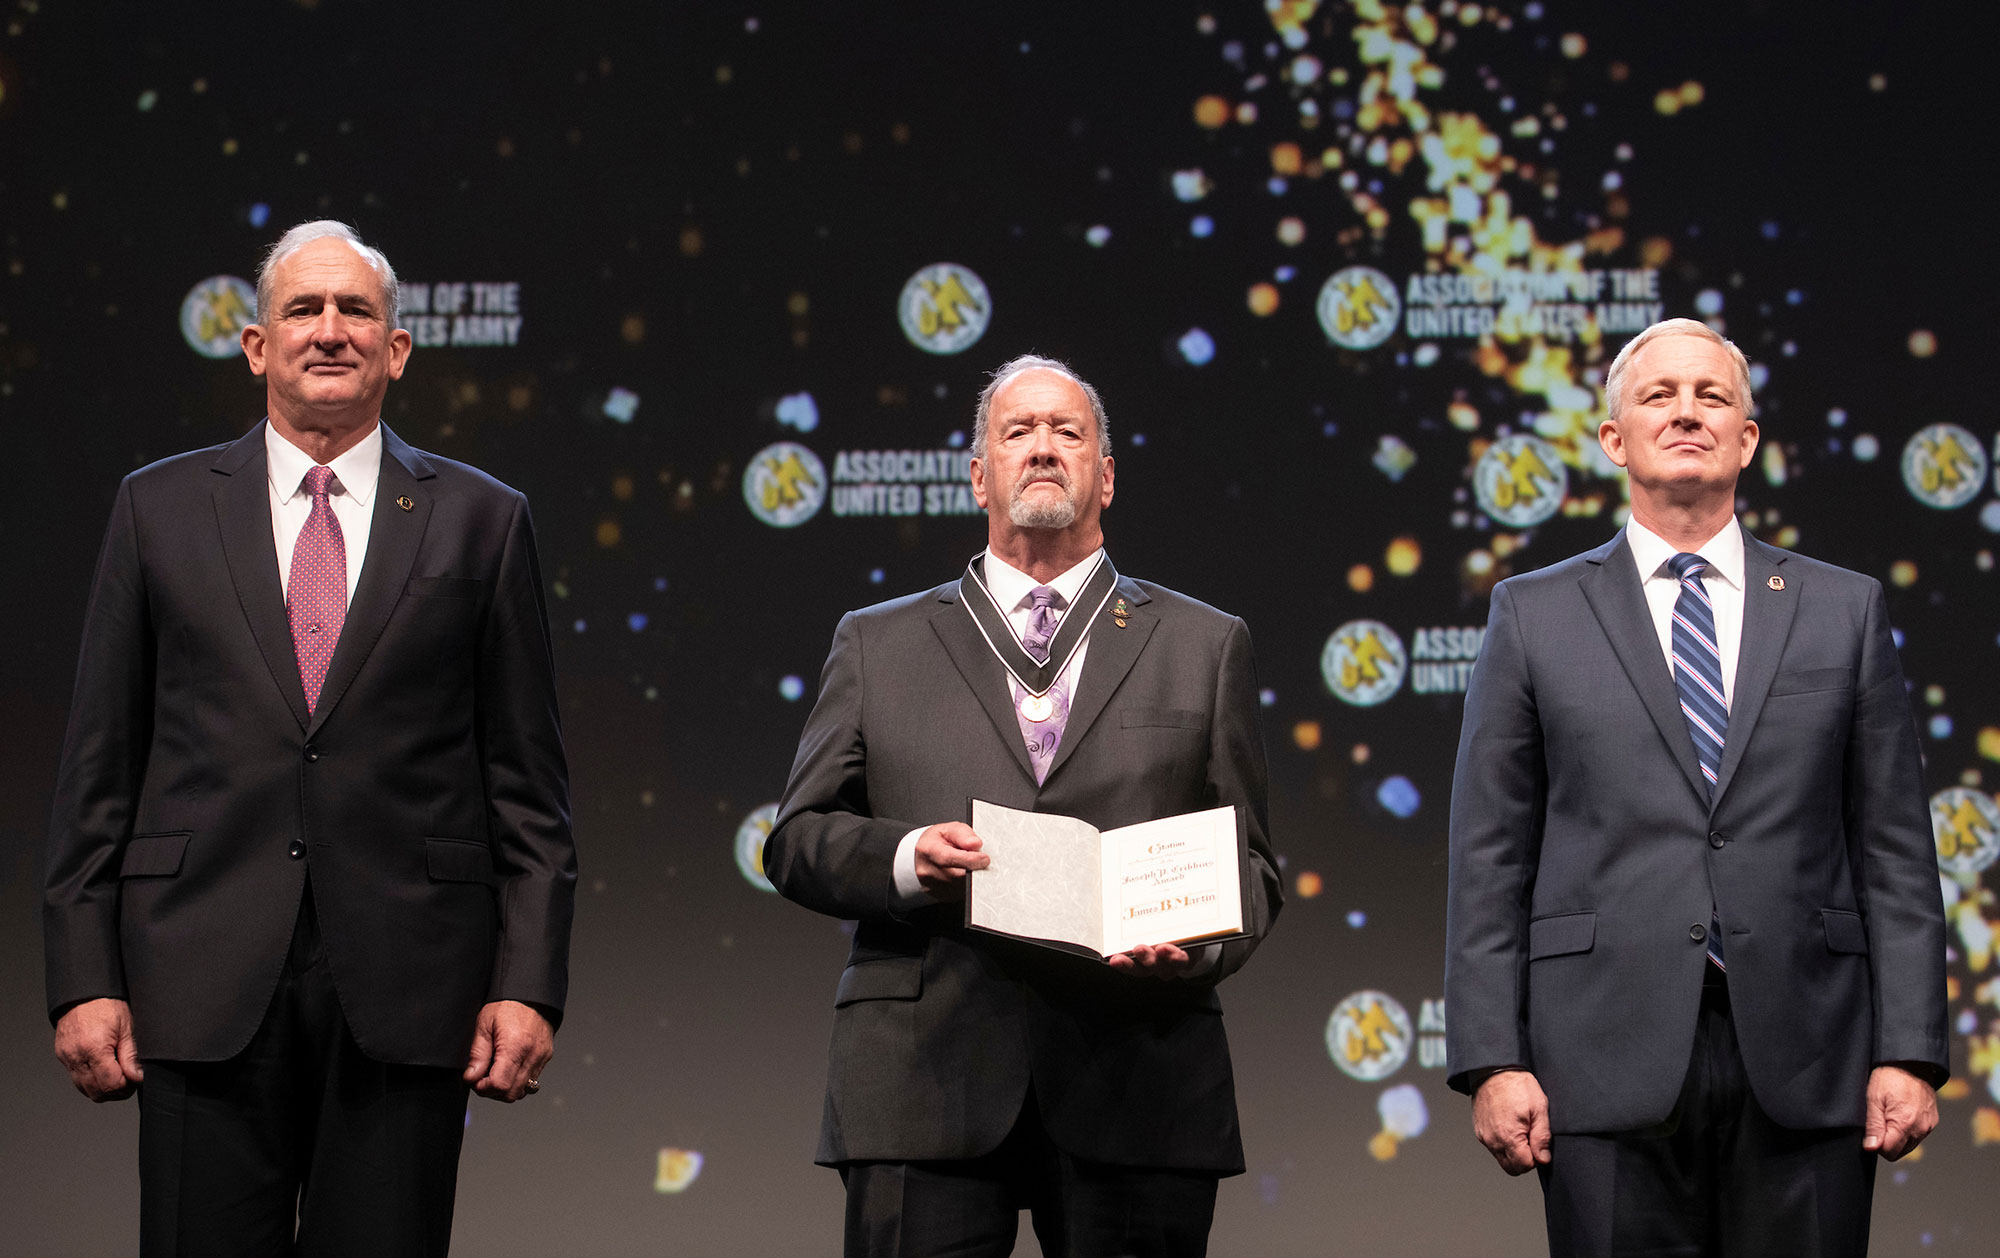 Dr. James Martin, center, received the Association of the U.S. Army's Joseph P. Cribbins Medal for exemplary service by a Department of the Army civilian during the AUSA Annual Meeting and Exposition, Oct. 11 at the Walter E. Washington Convention Center in Washington, D.C.